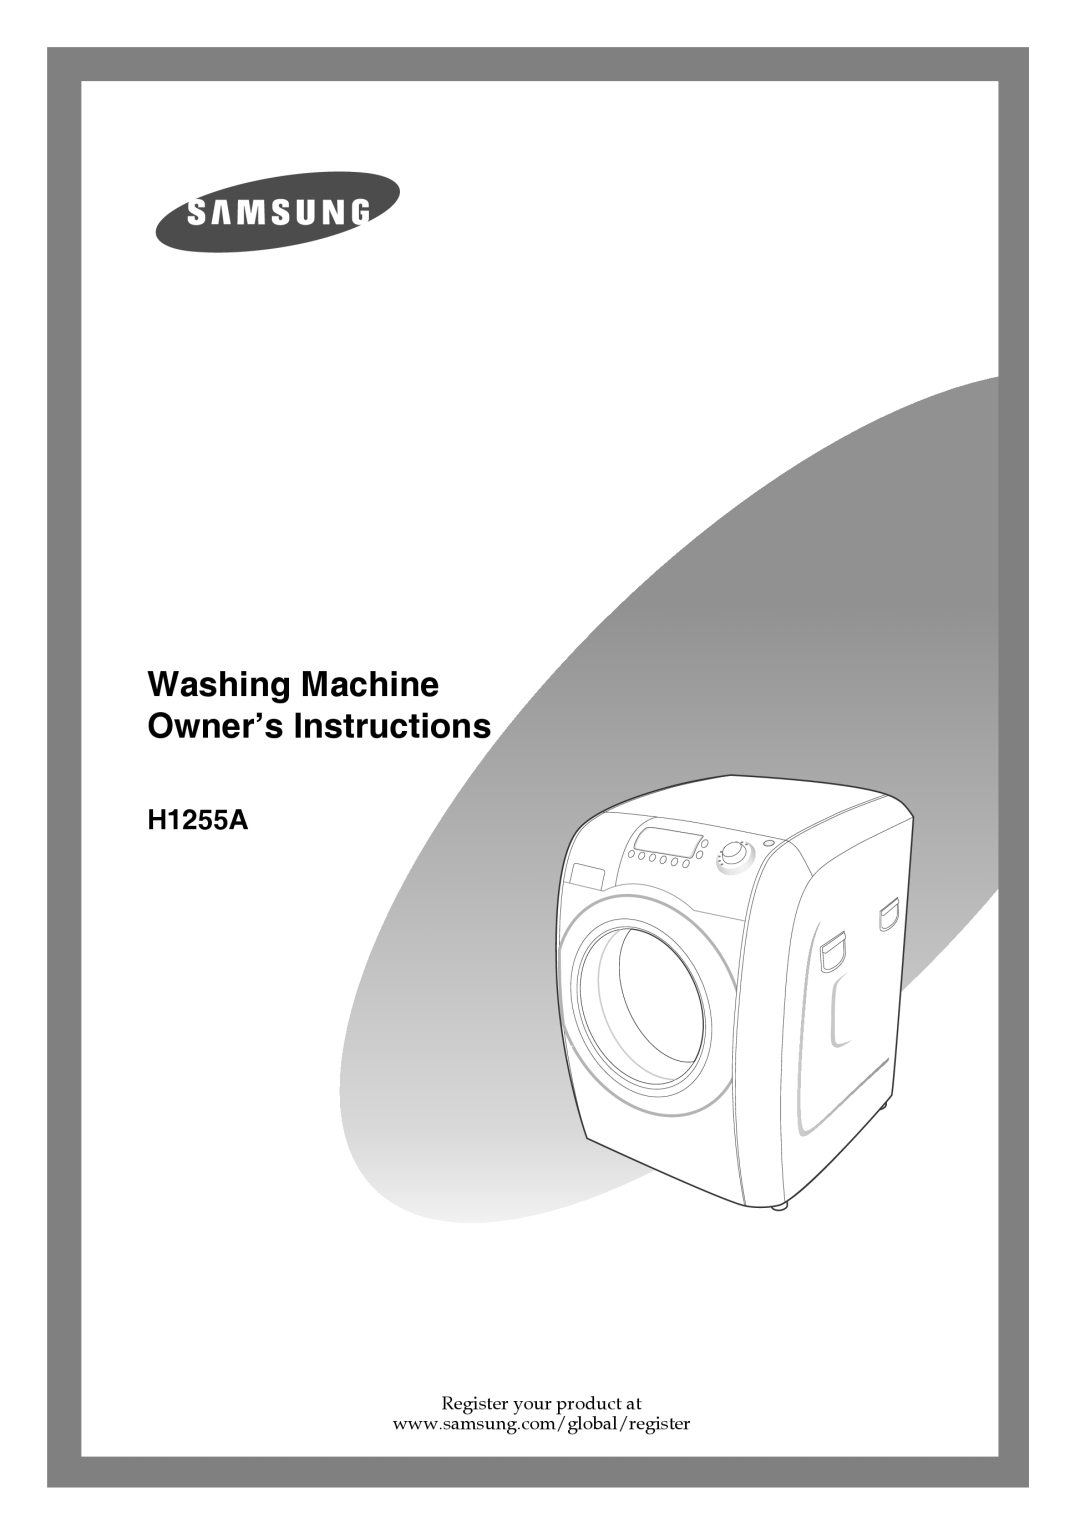 Samsung H1255AGS/XET, H1255AGS/XEU, H1255AGS/YLE, H1255AGS/XEH, H1255AGS/XEG manual Washing Machine Owner’s Instructions 